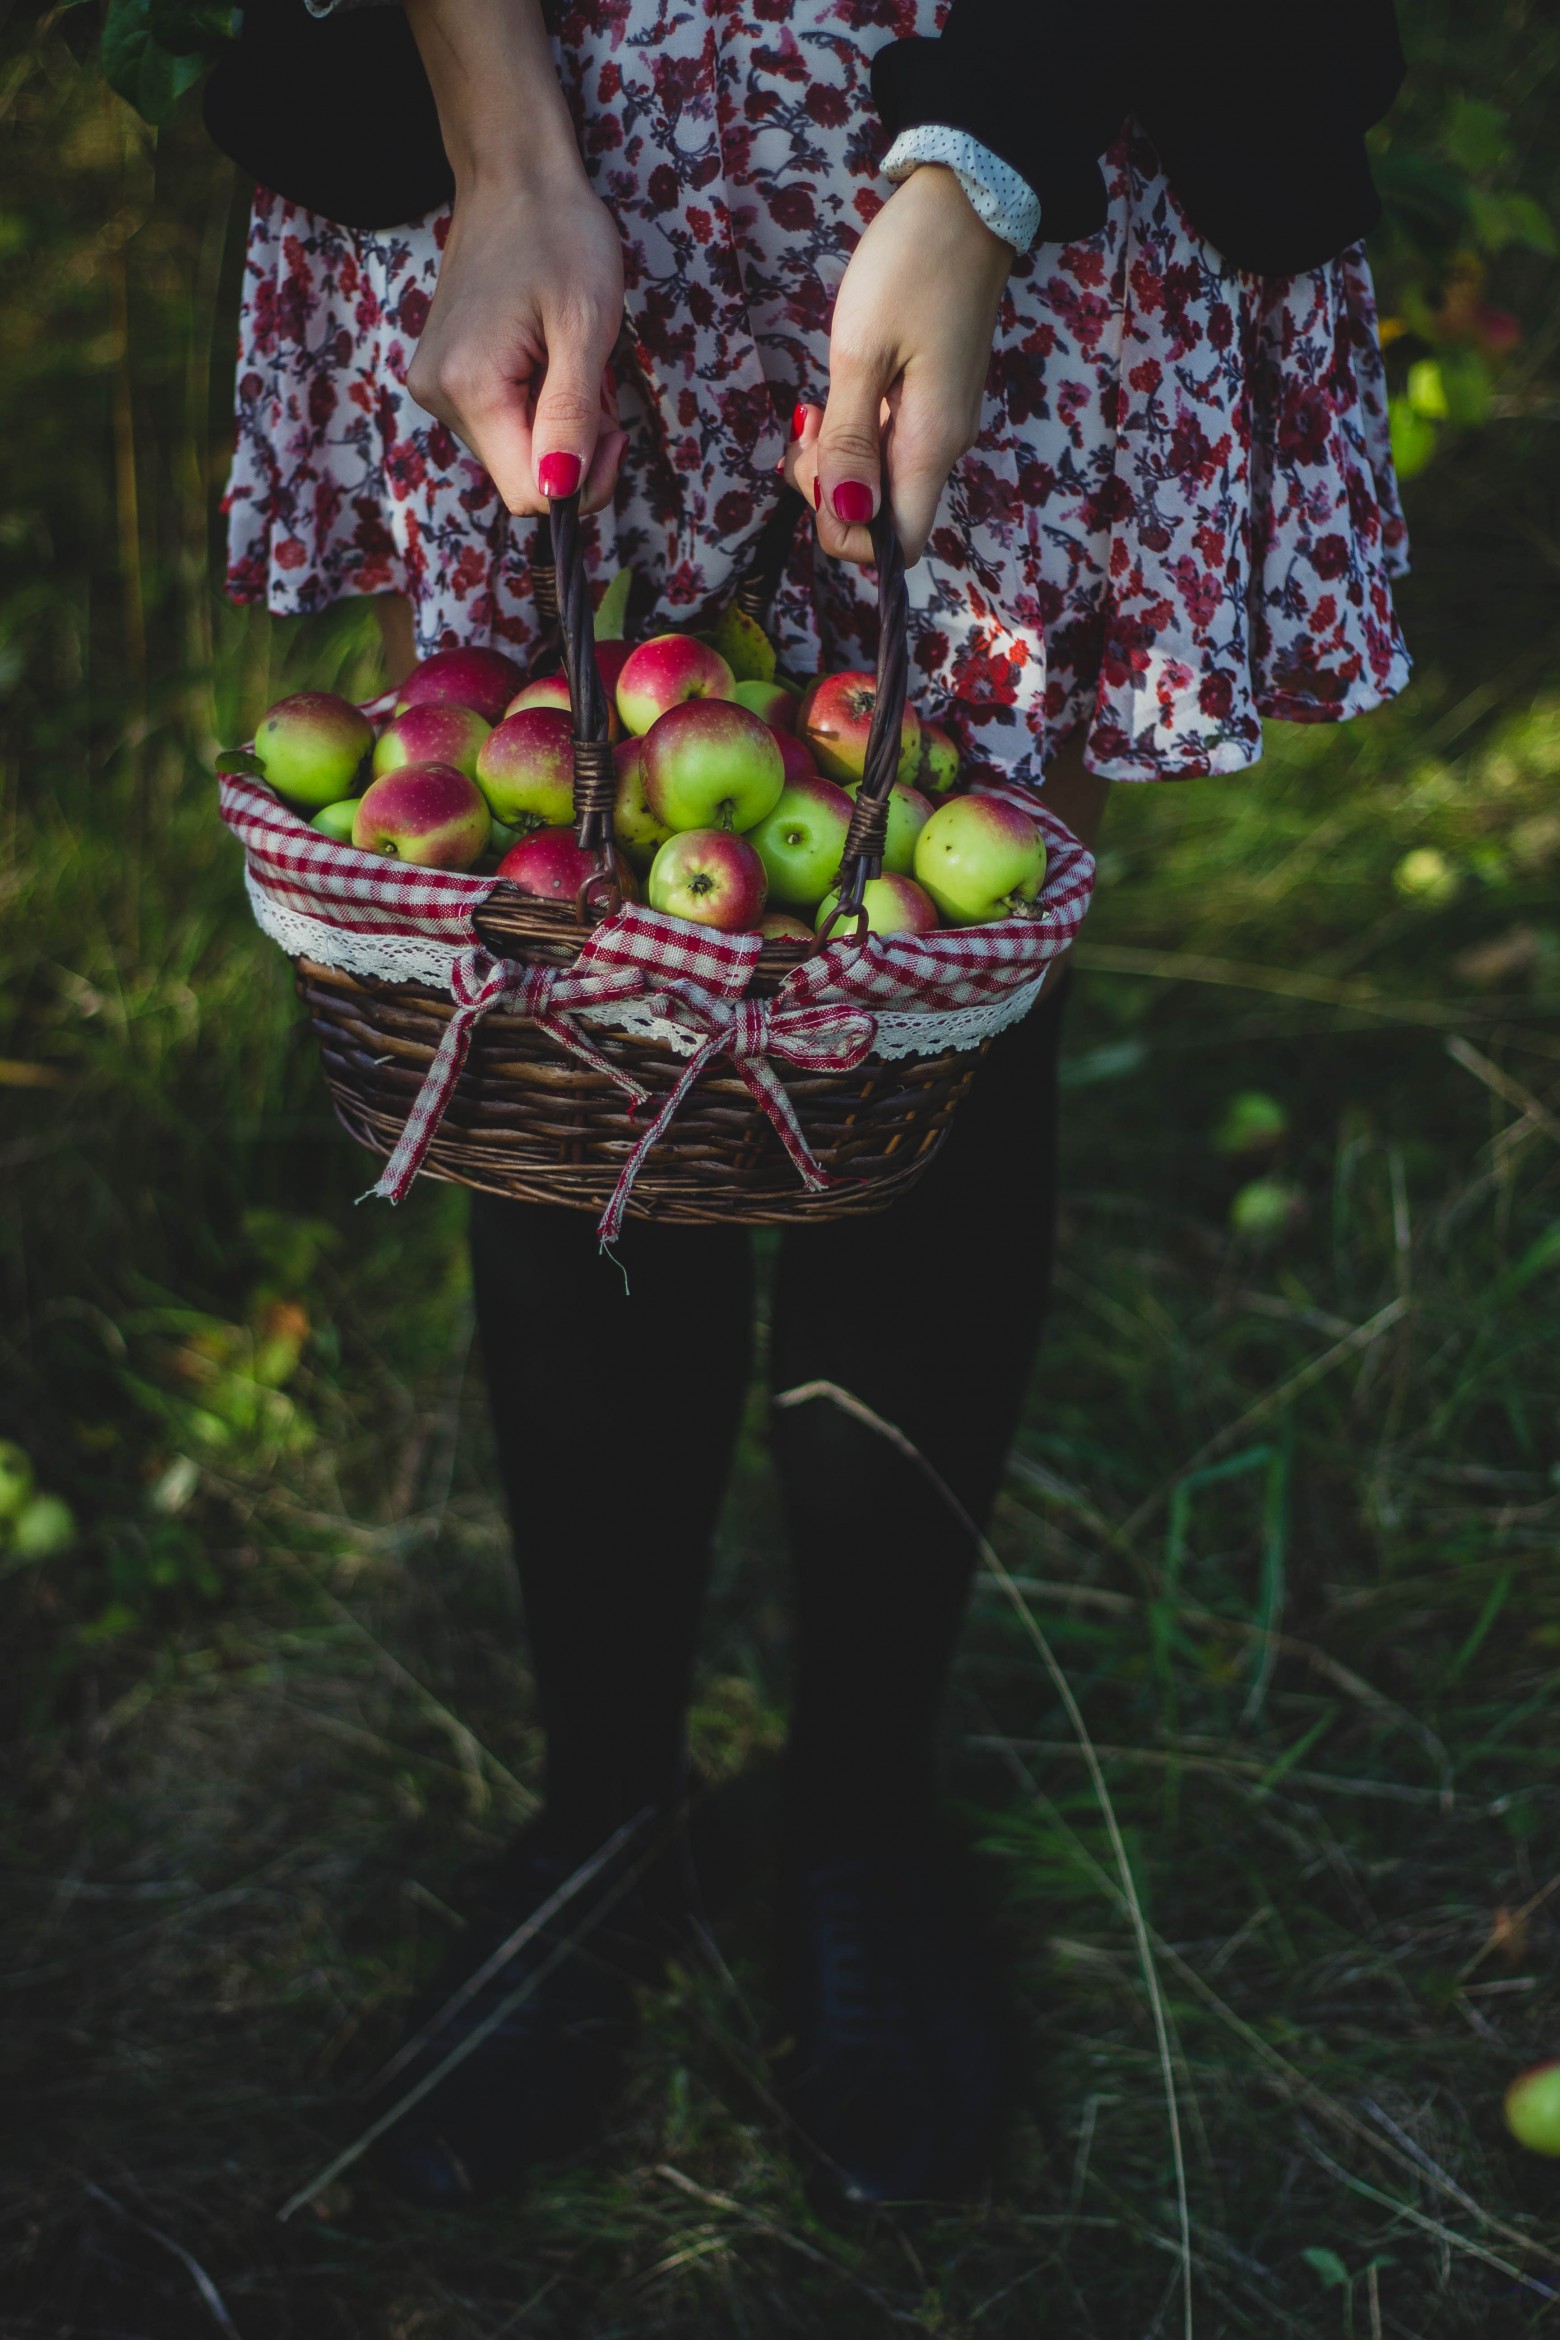 59362 download wallpaper food, apples, girl, basket, harvest screensavers and pictures for free